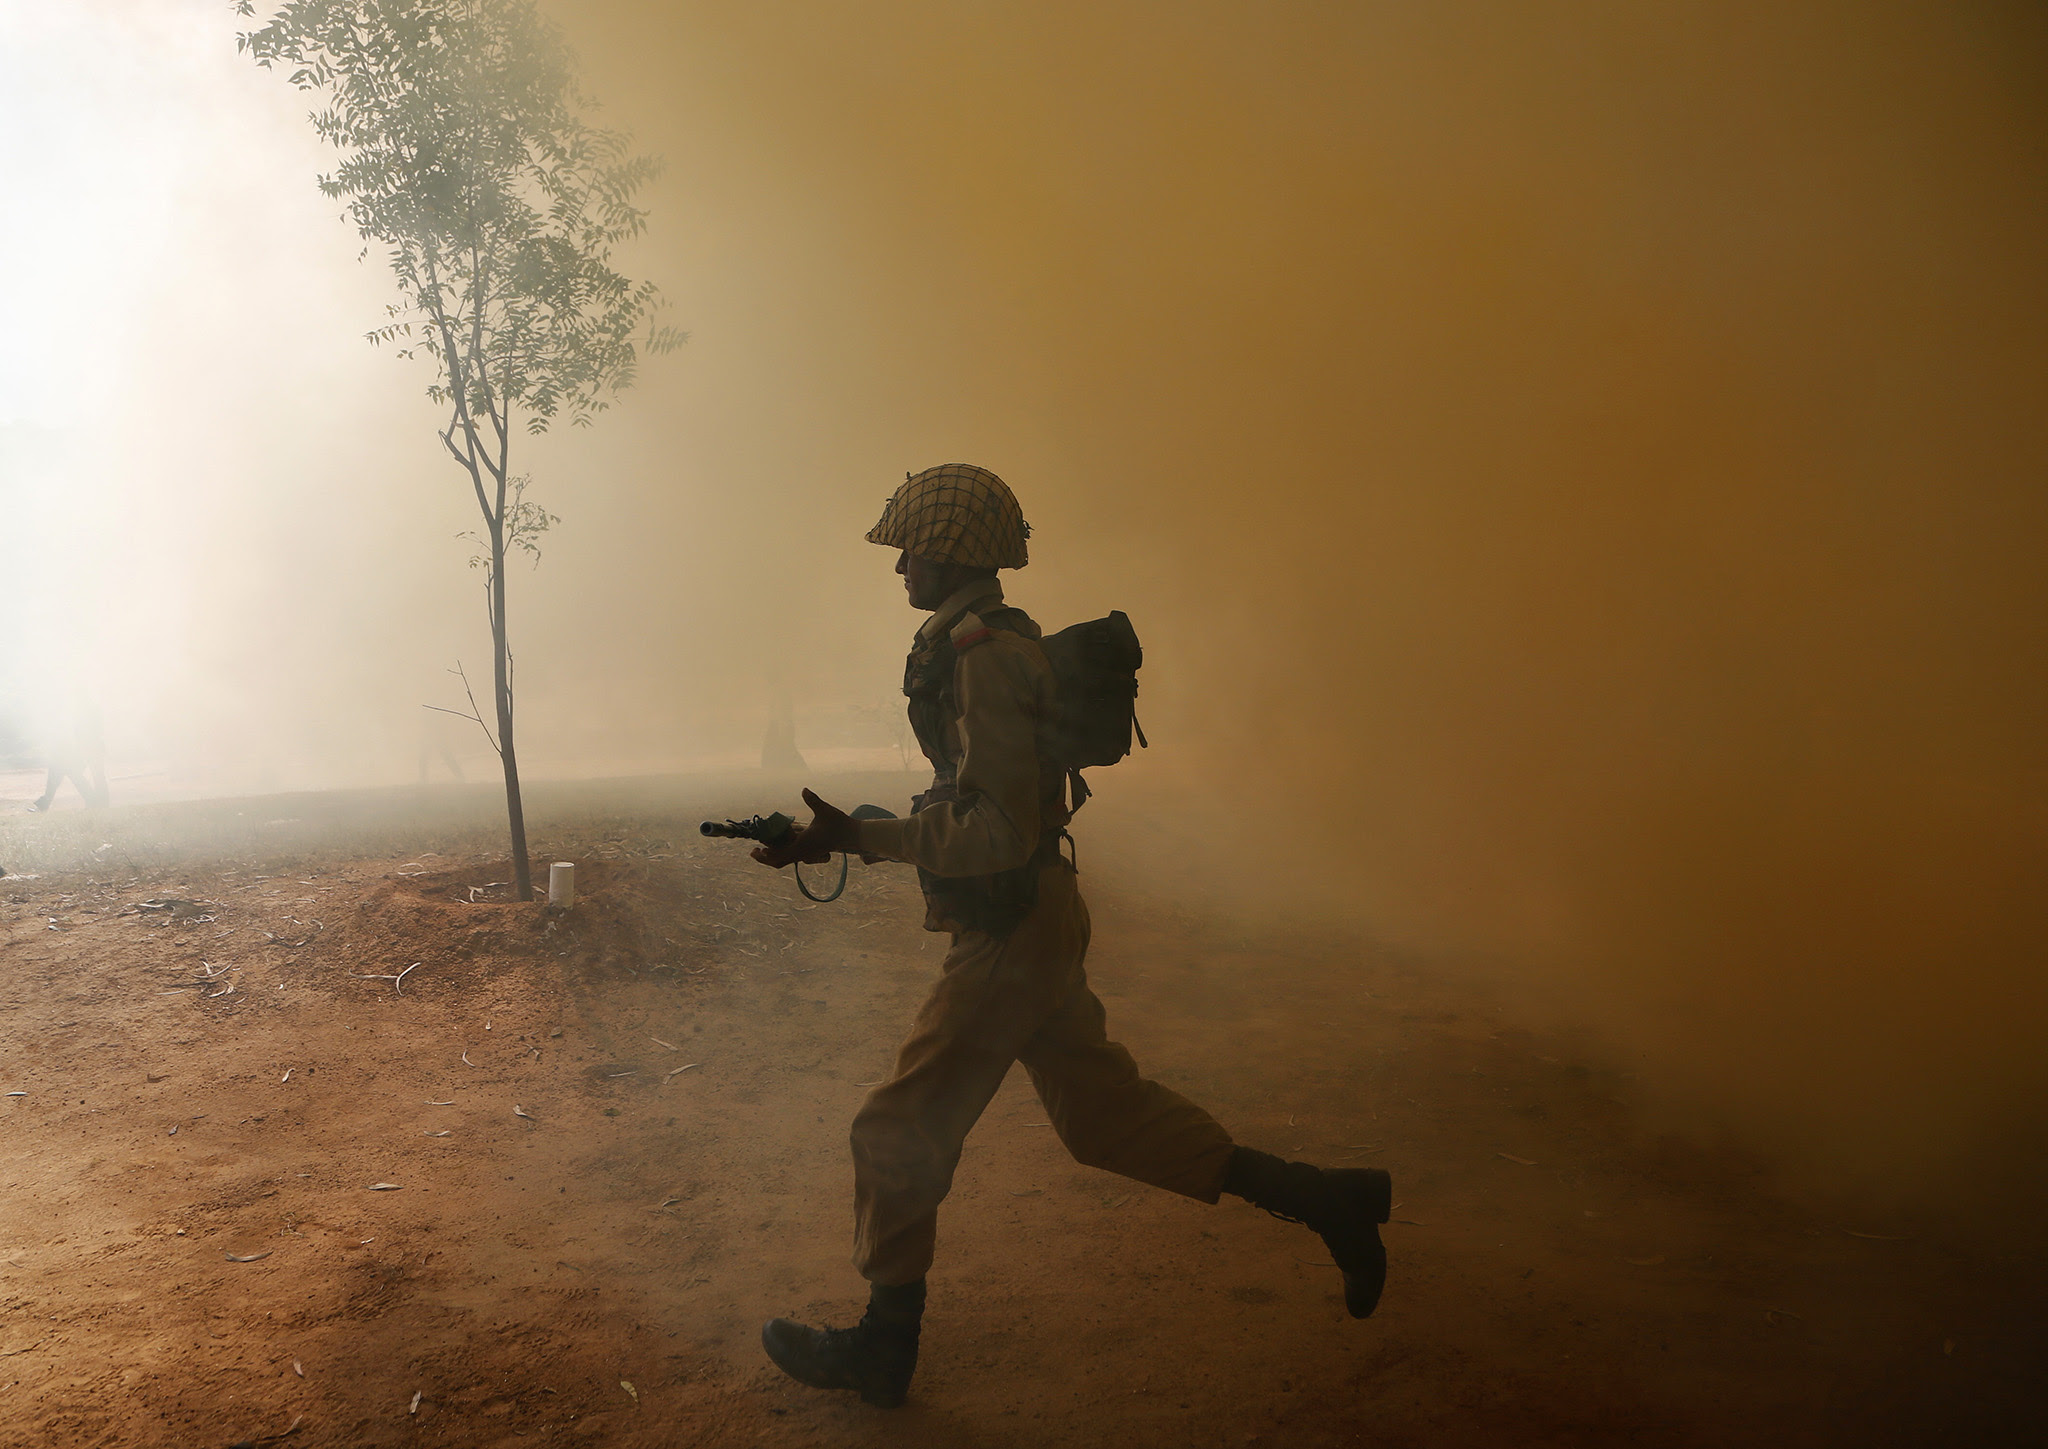 An Indian army soldier runs amid smoke from canisters during a session to showcase skills at the Army Service Corps training centre in Bangalore, India, Monday, Dec. 5, 2016. (AP Photo/Aijaz Rahi)